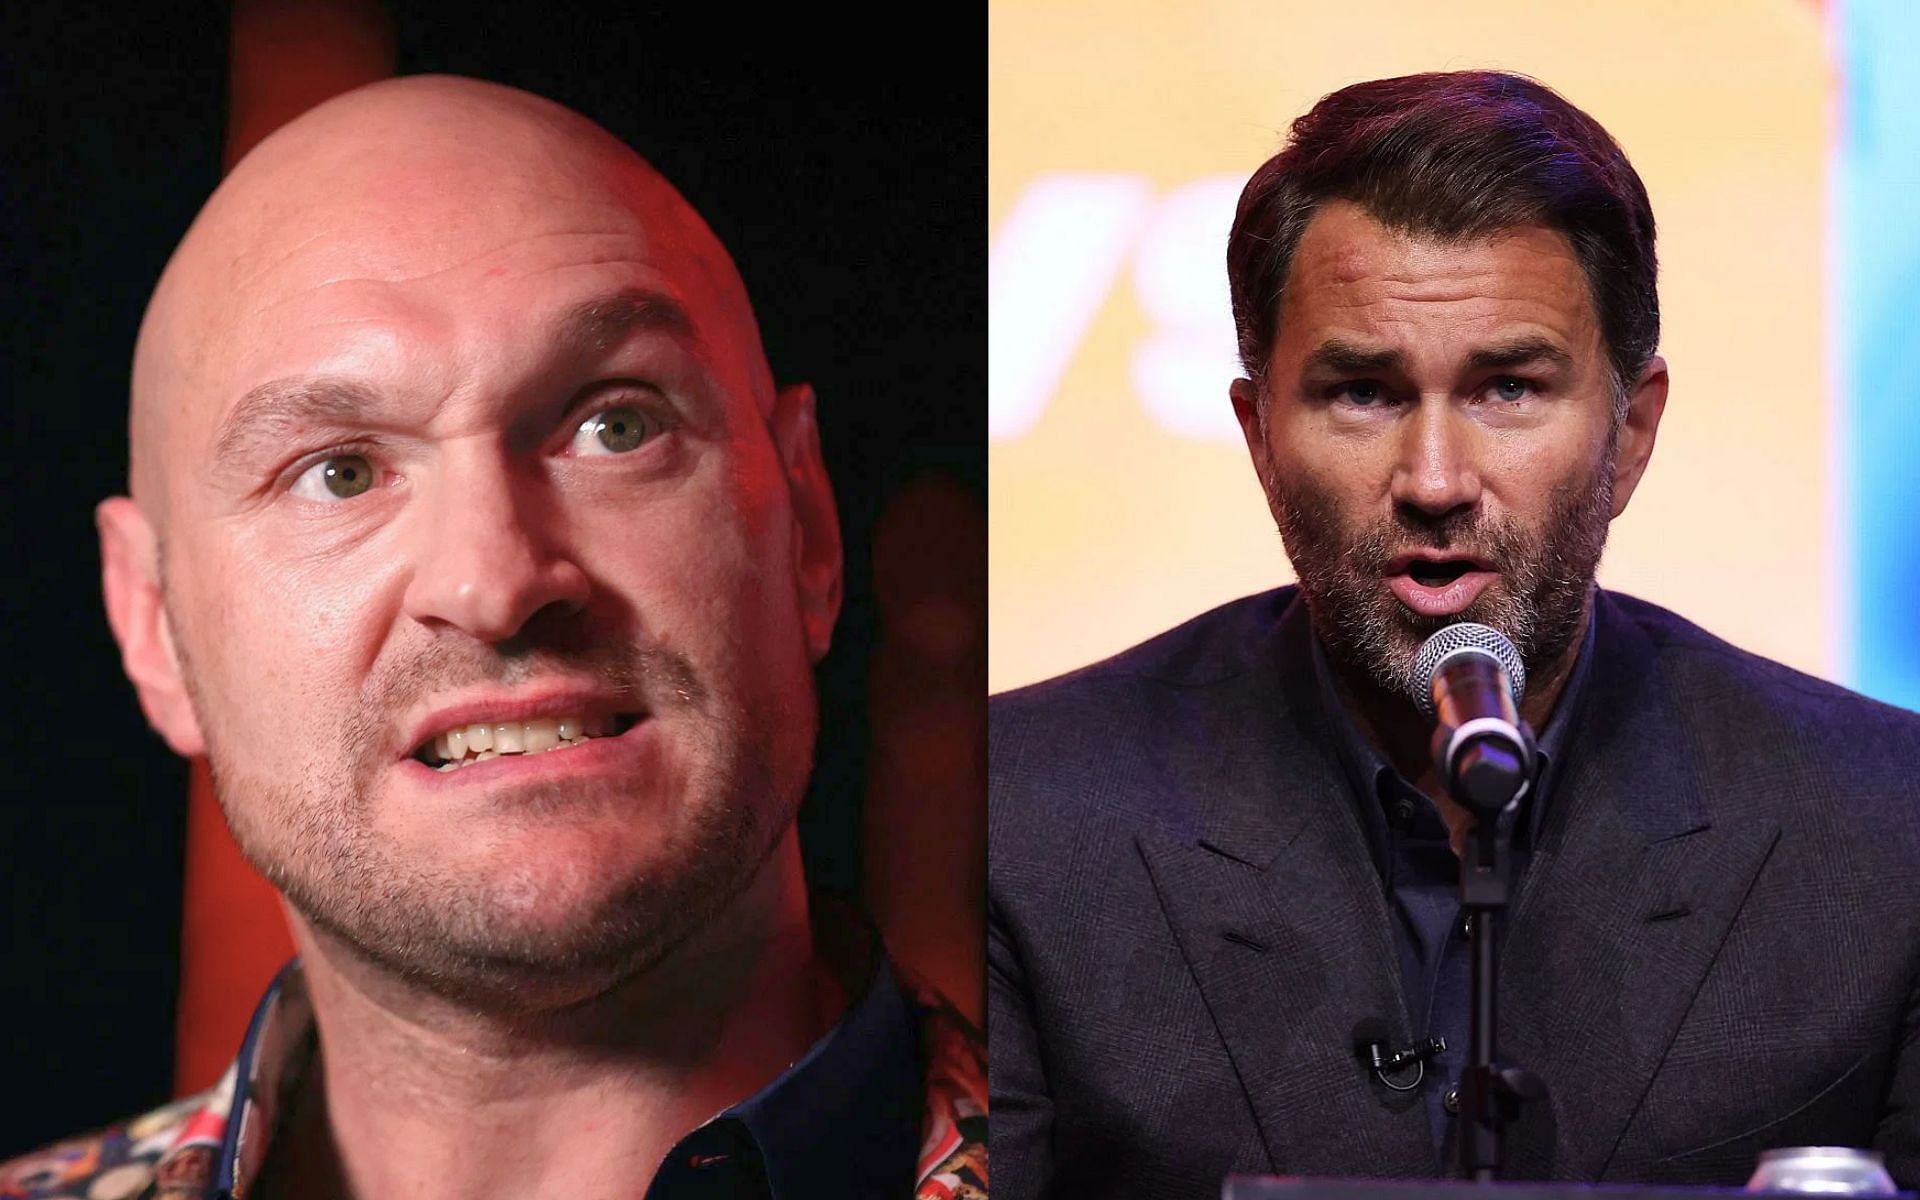 Eddie Hearn (right) shares firm stance on Tyson Fury (left) potentially asking someone to cut his eye to avoid Oleksandr Usyk fight [Images Courtesy: @GettyImages]